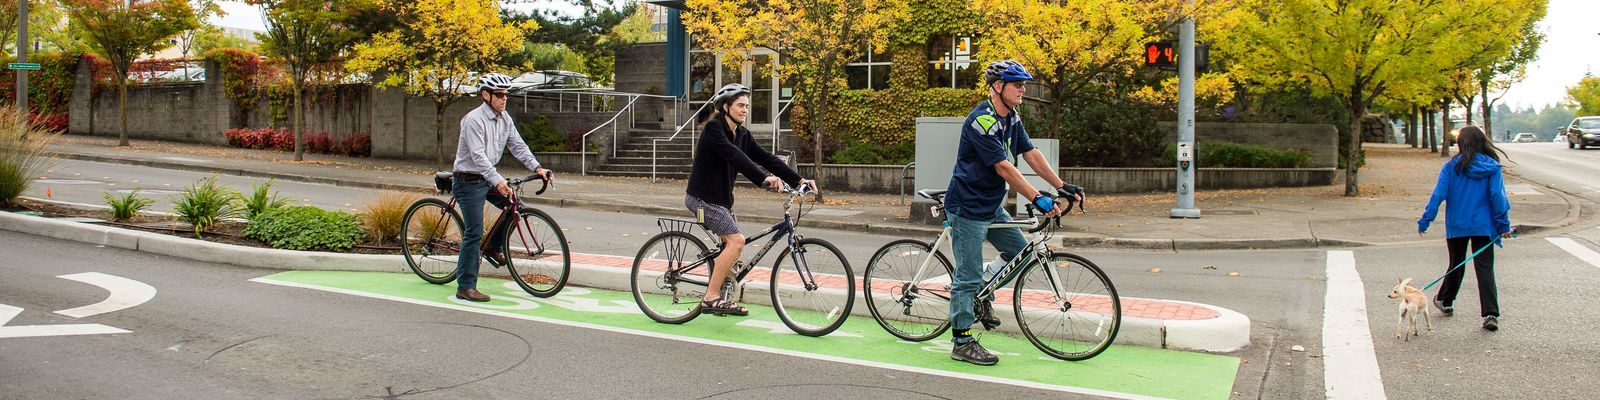 Image of bicyclists stopped in a green bike box in an intersection while a pedestrian and dog cross the street.